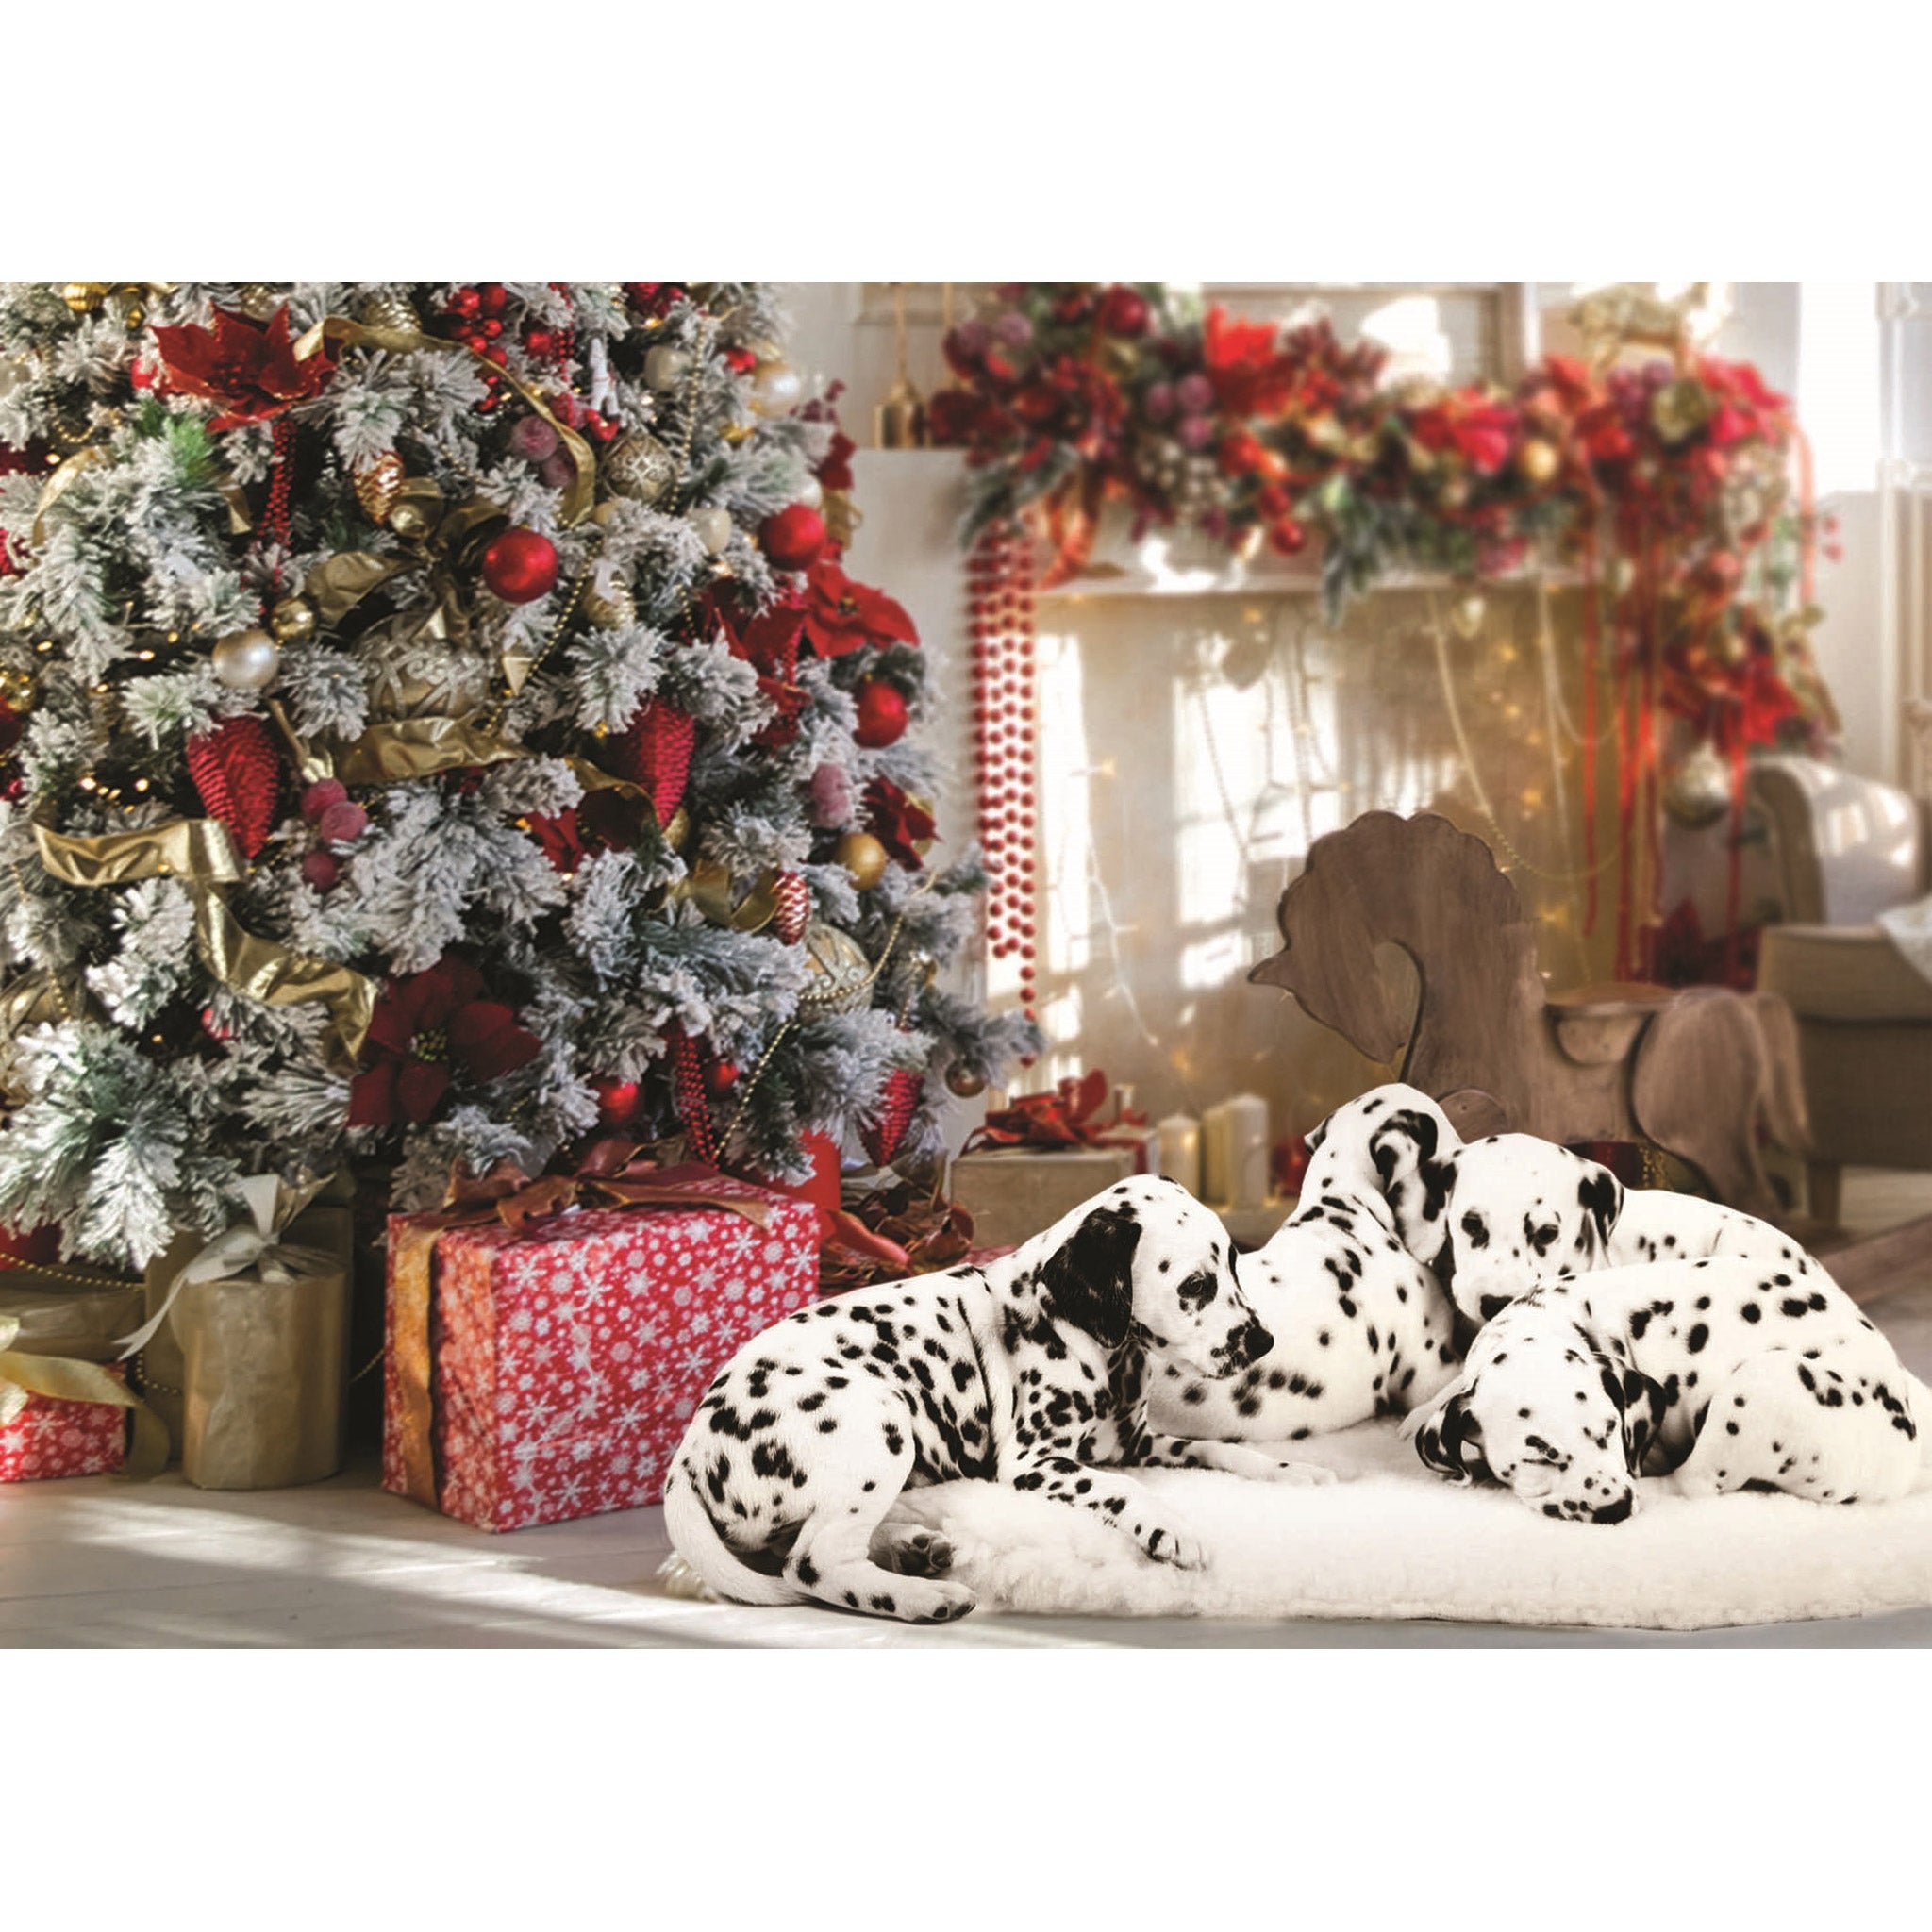 Four Dalmation puppies lie on a fluffy white rug by a Christmas tree with red and gold decorations and presents wrapped in red and gold paper.